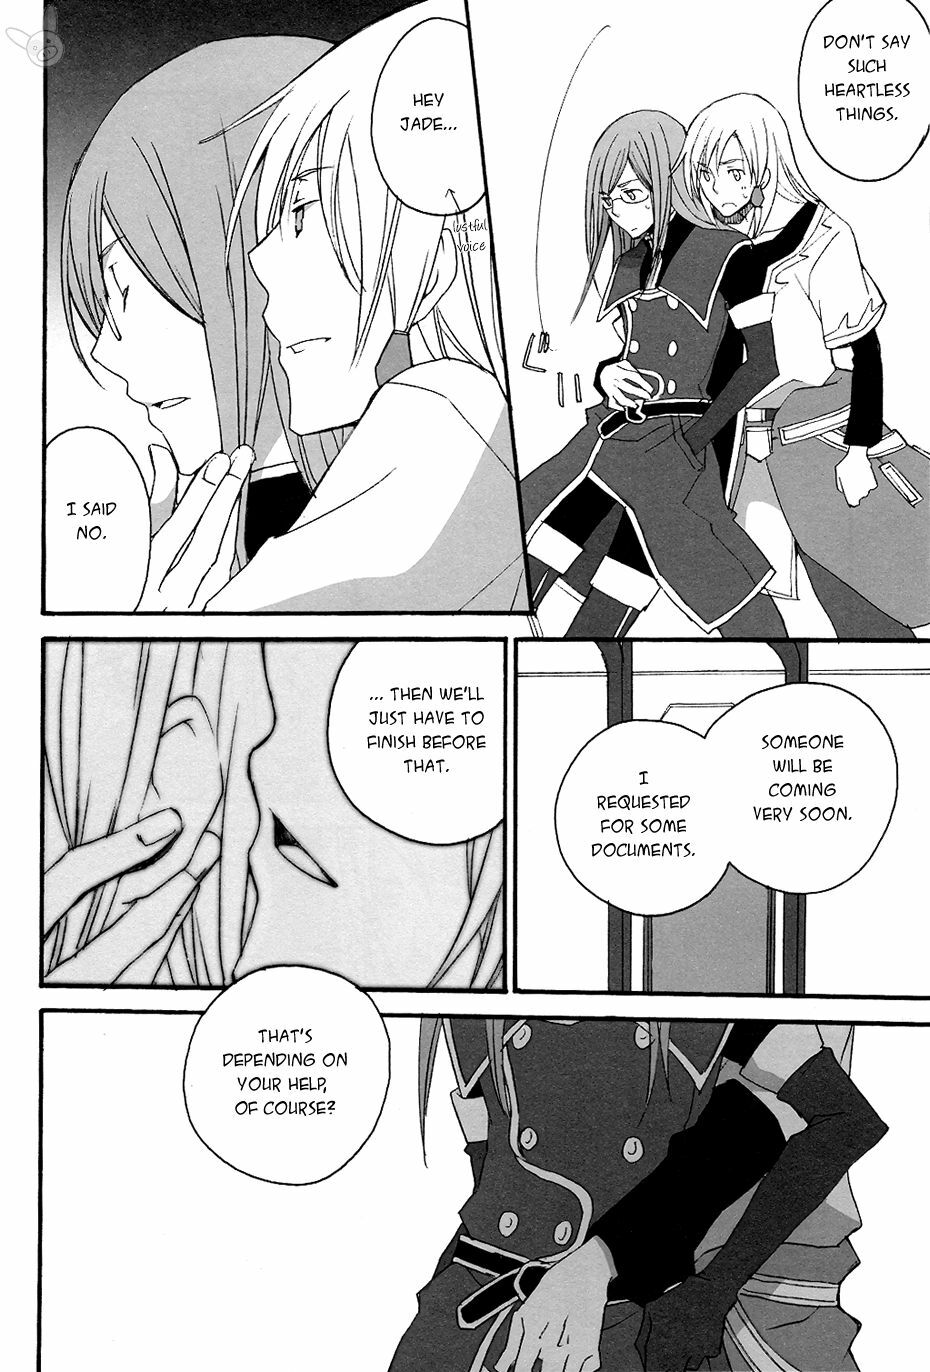 [megaton megane (Thomas)] Isoide Heaven (Tales of the Abyss) [English] page 6 full